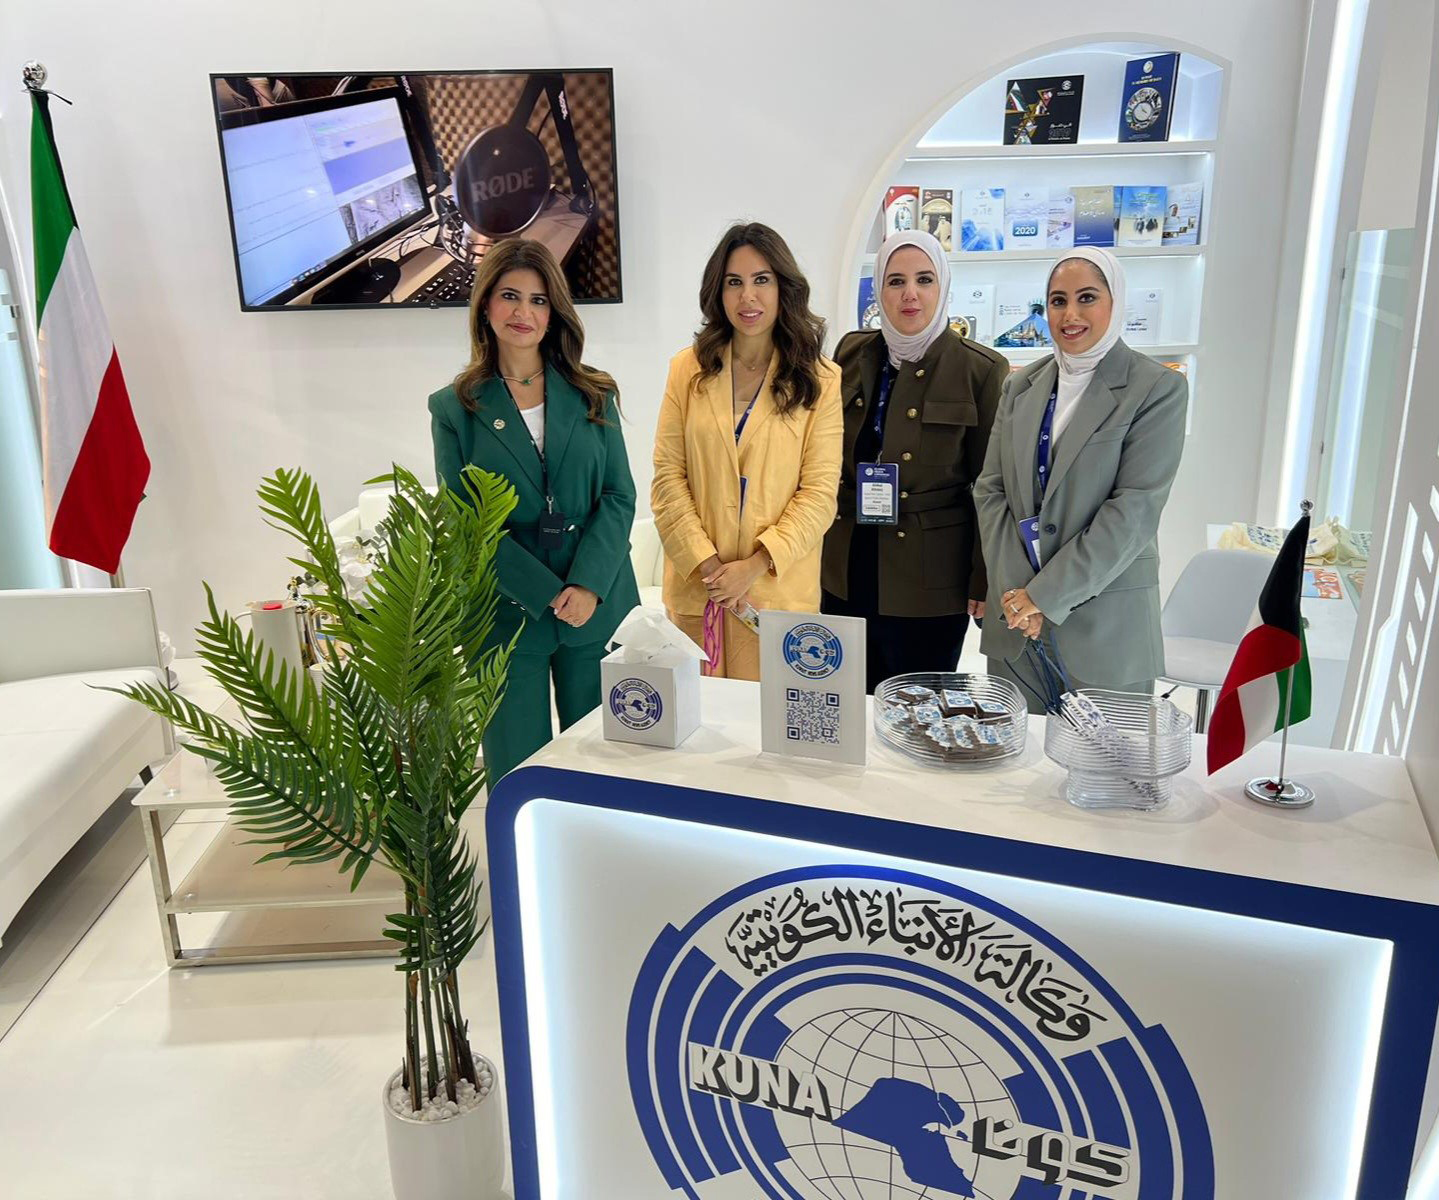 (KUNA) Chief Dr.Fatmah Al-Salem with the agency's pavilion attendees